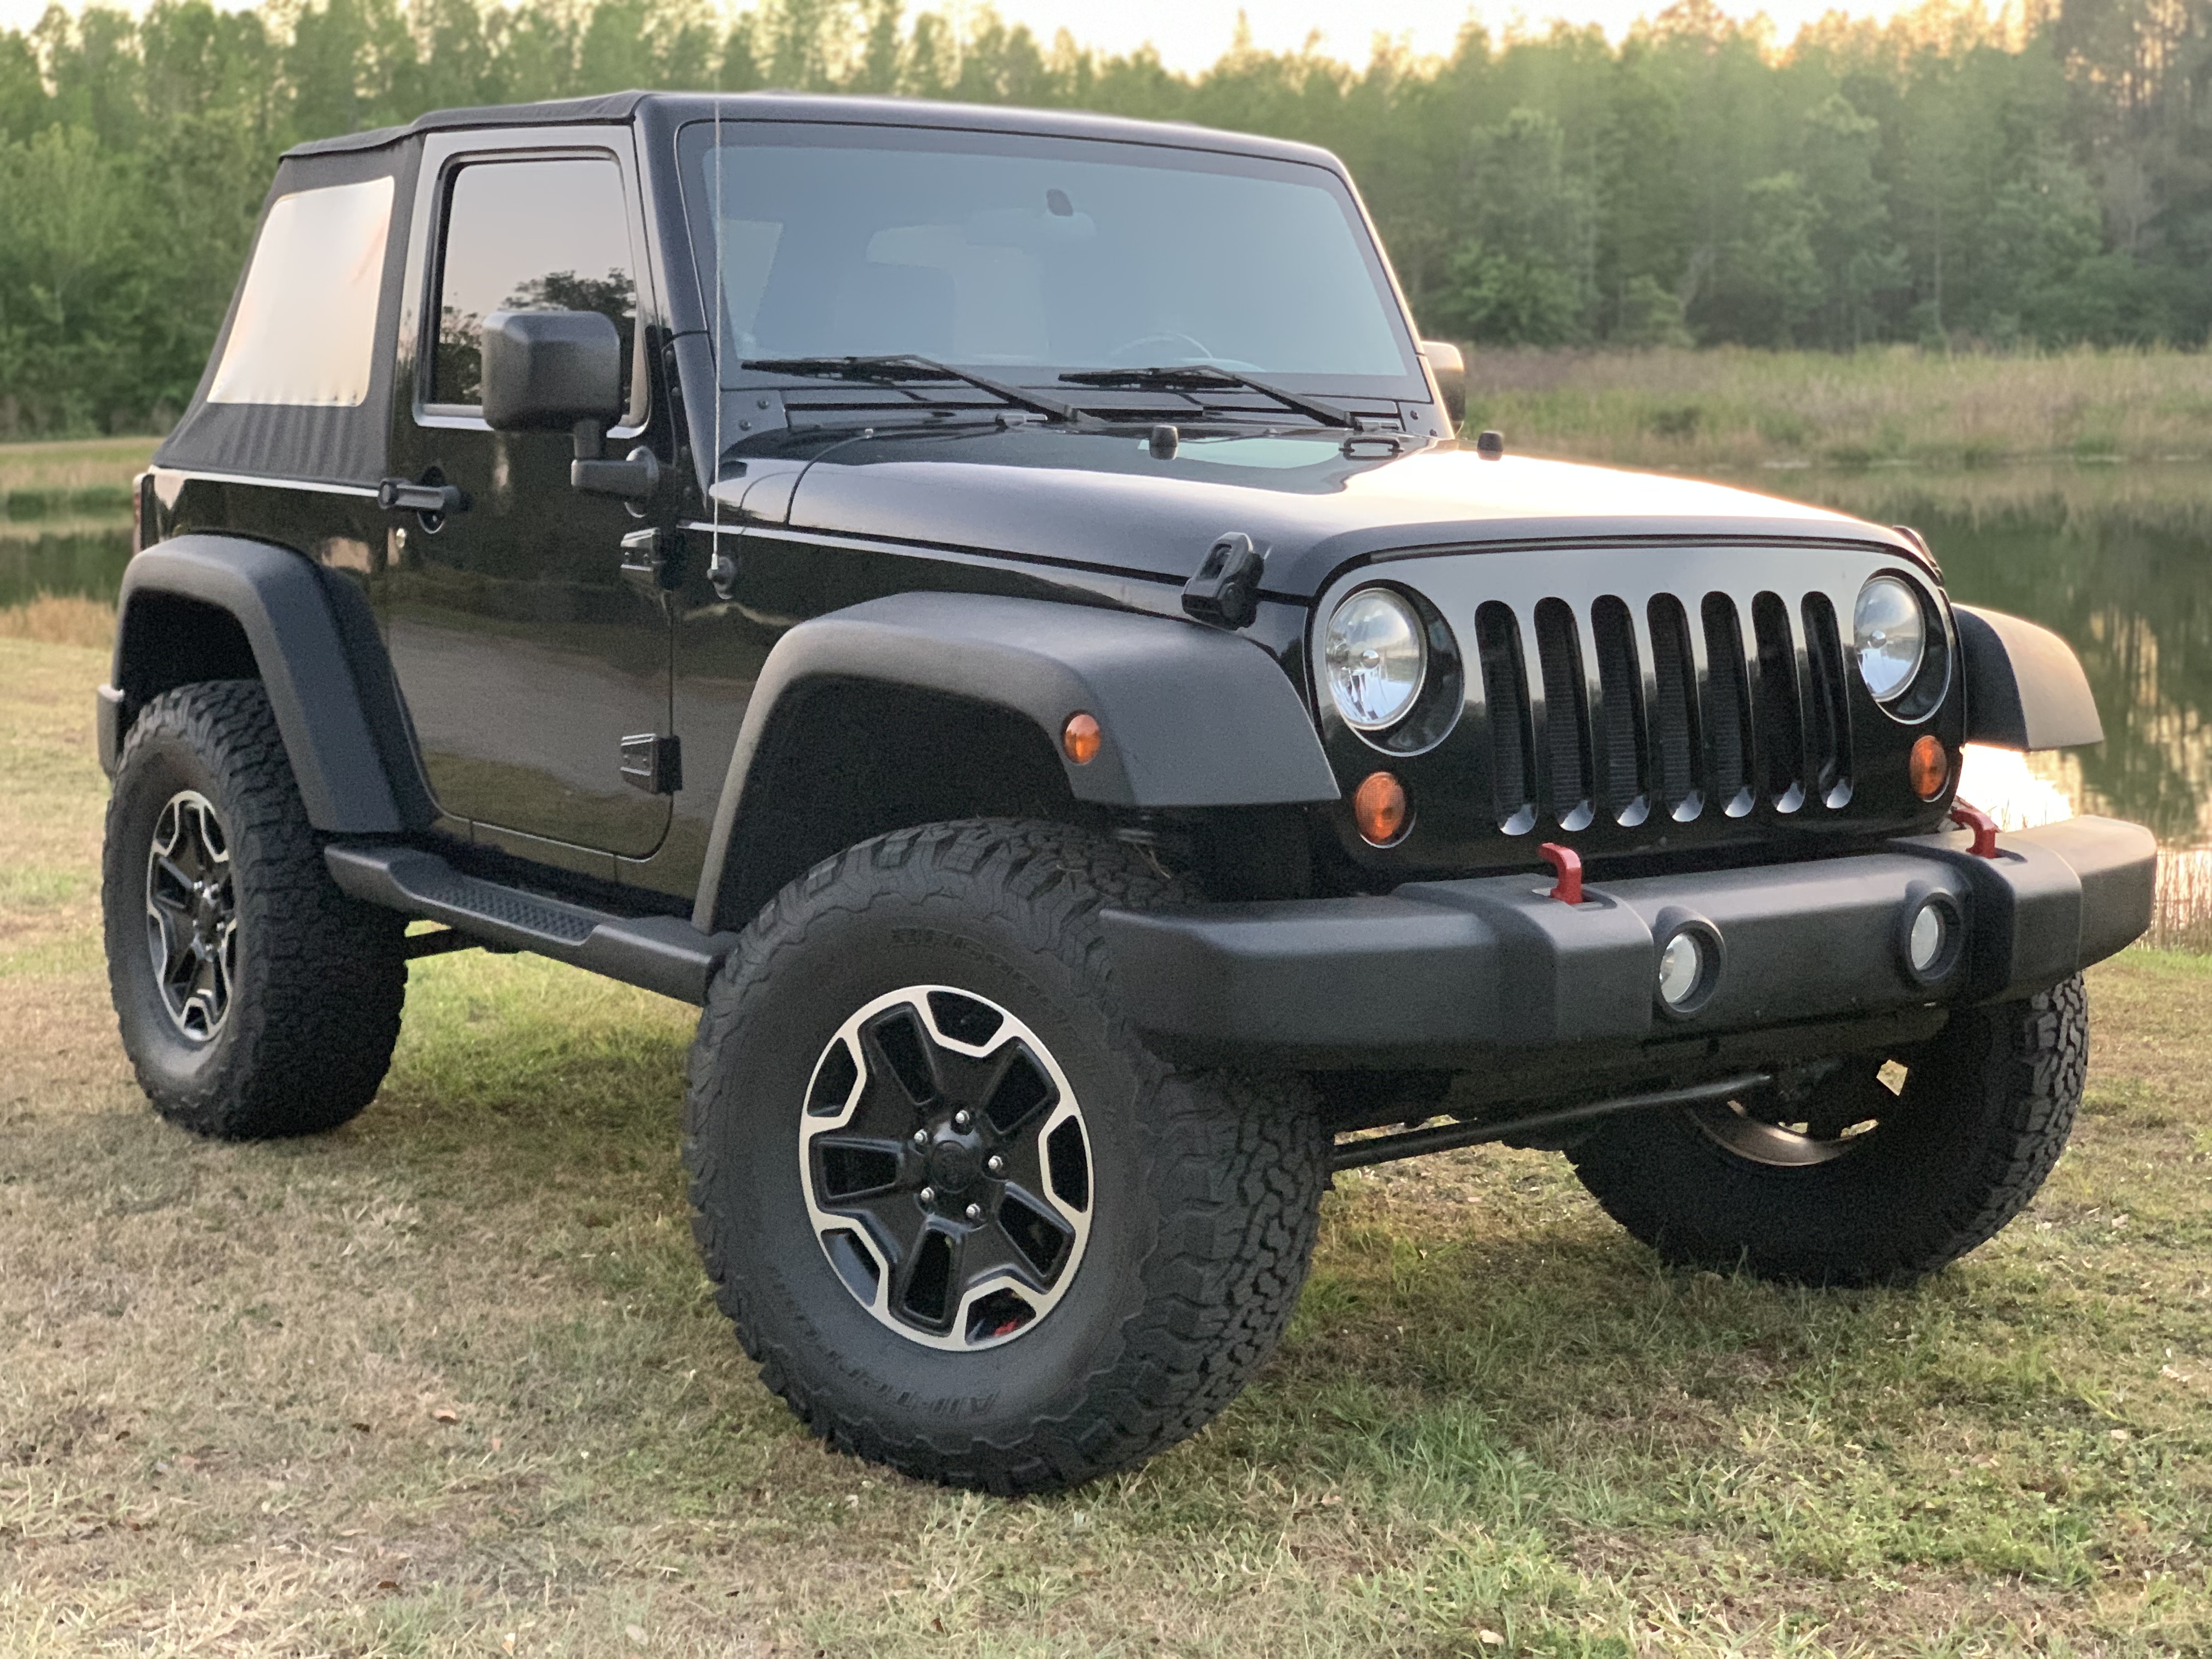 Used Jeep Wrangler for Sale in Wesley Chapel, FL 